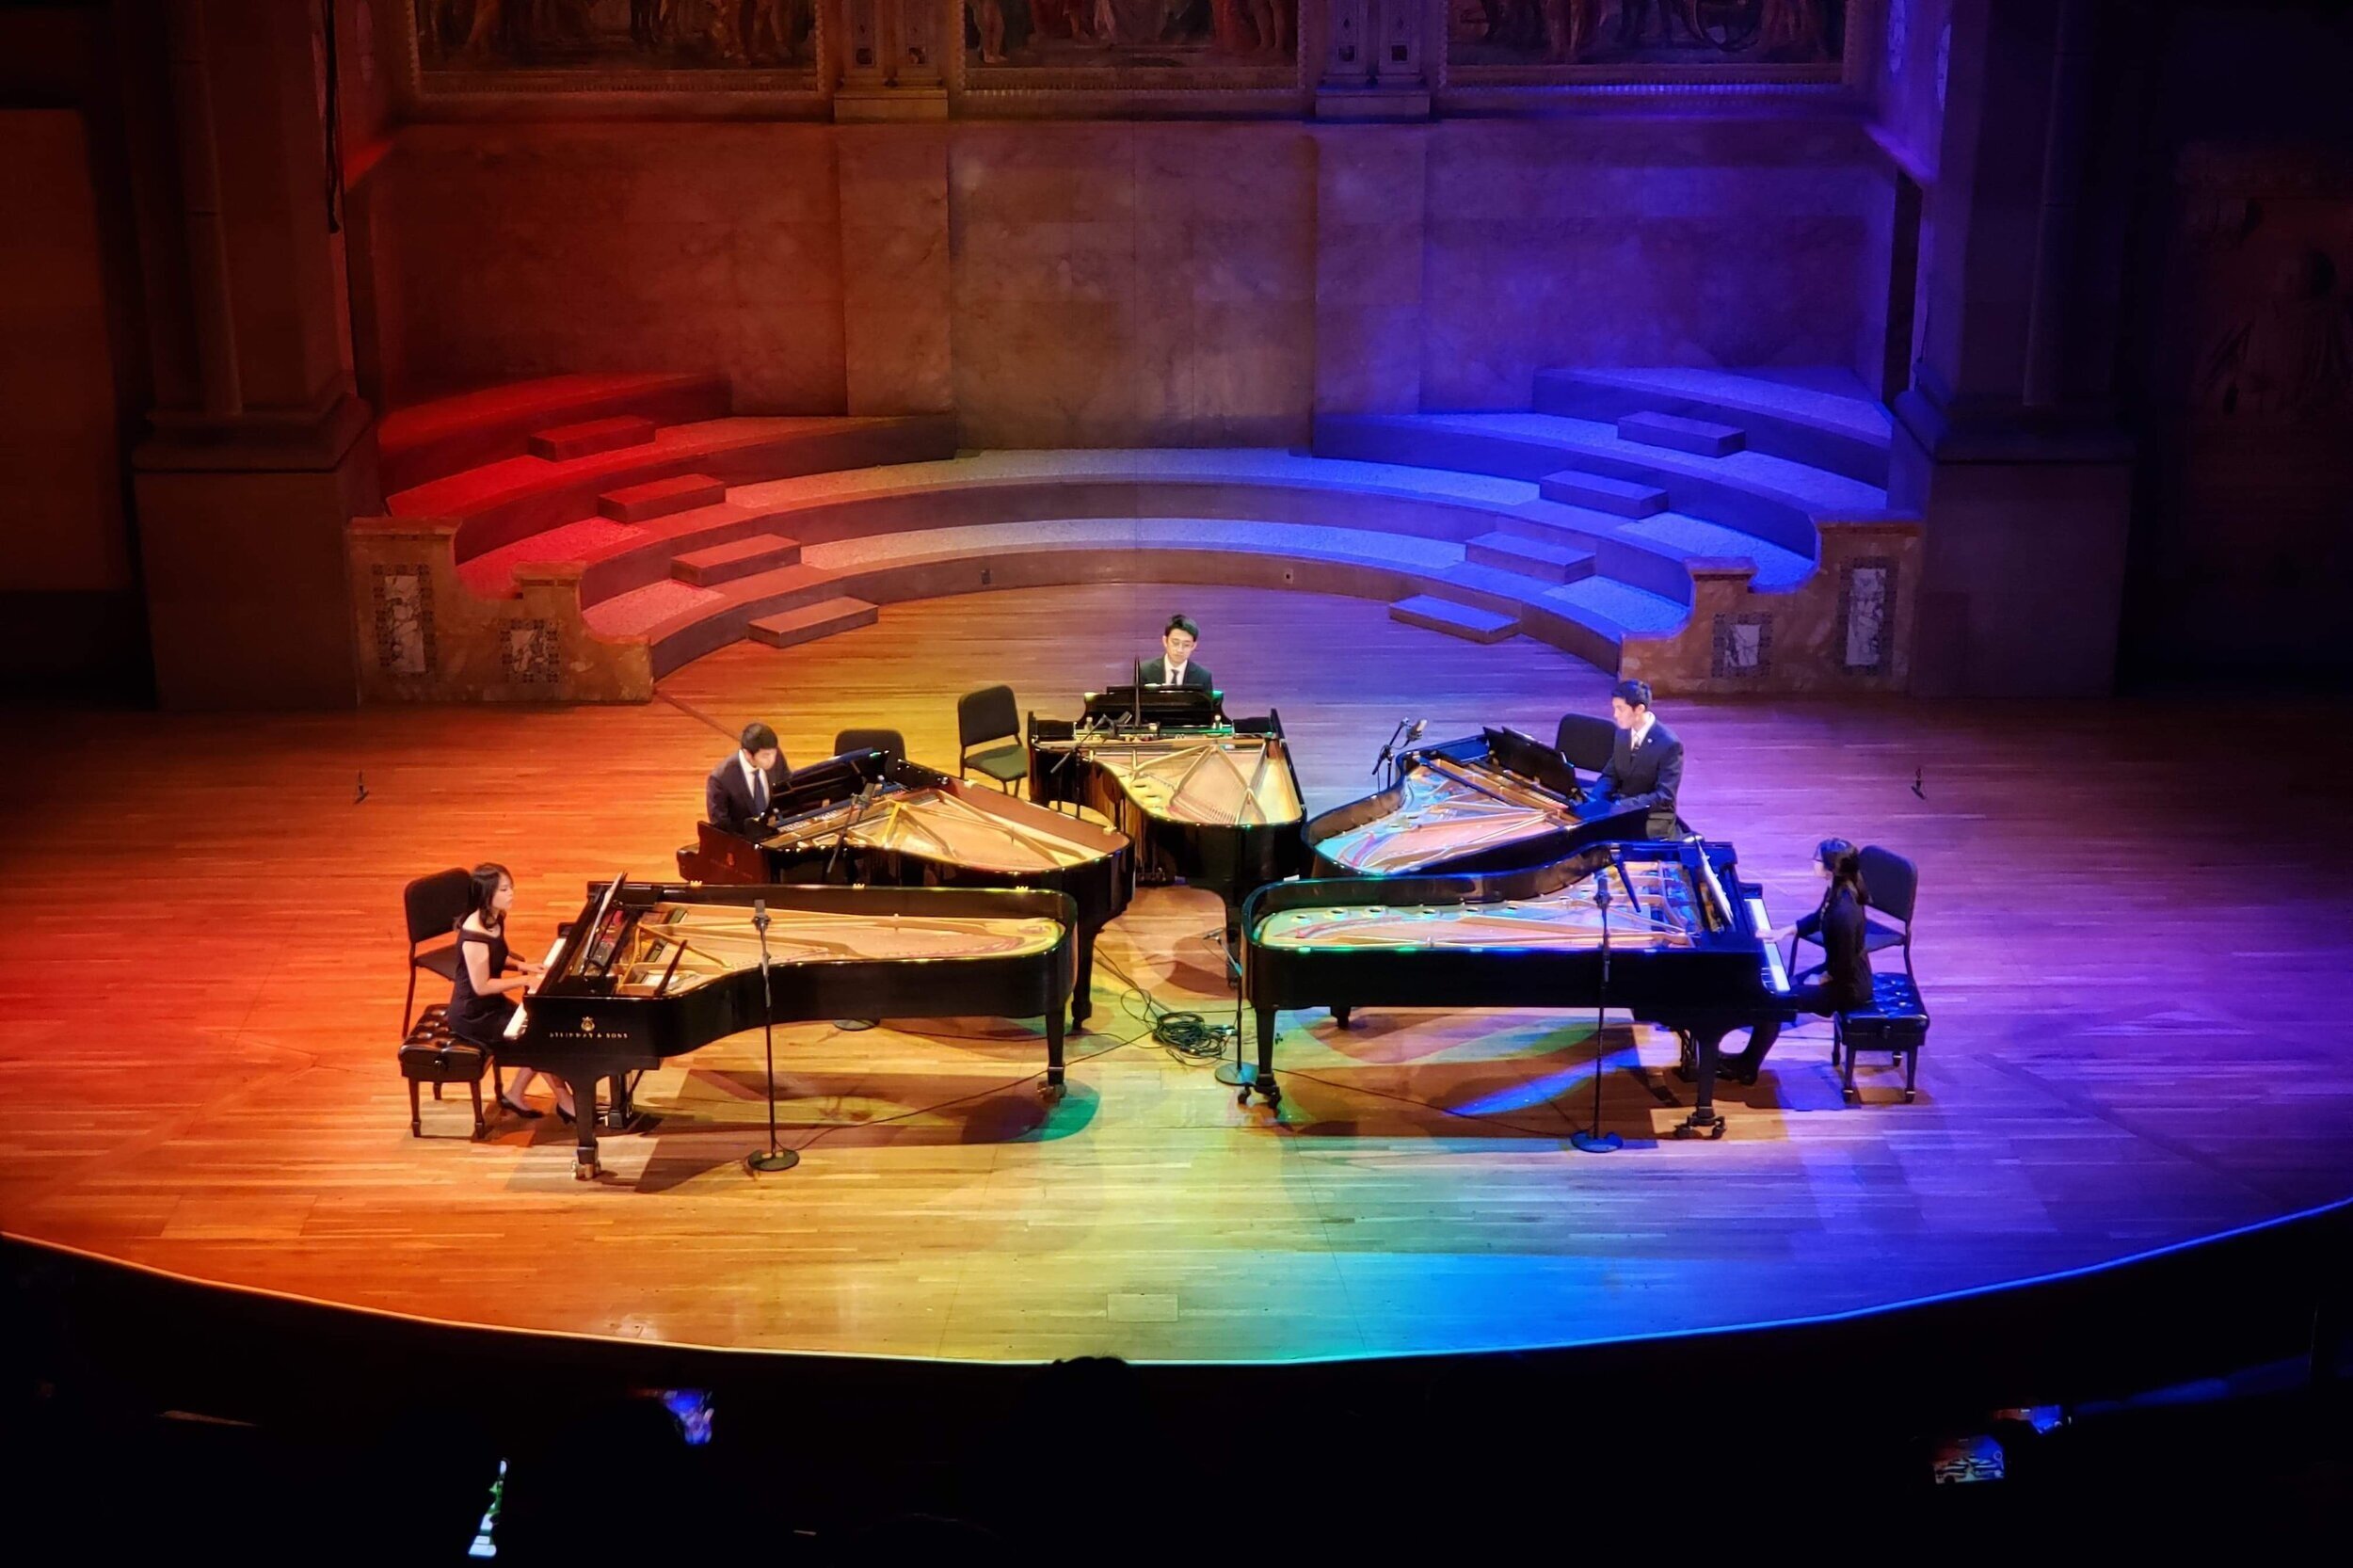 5 large pianos on stage at the same time, with pianists performing